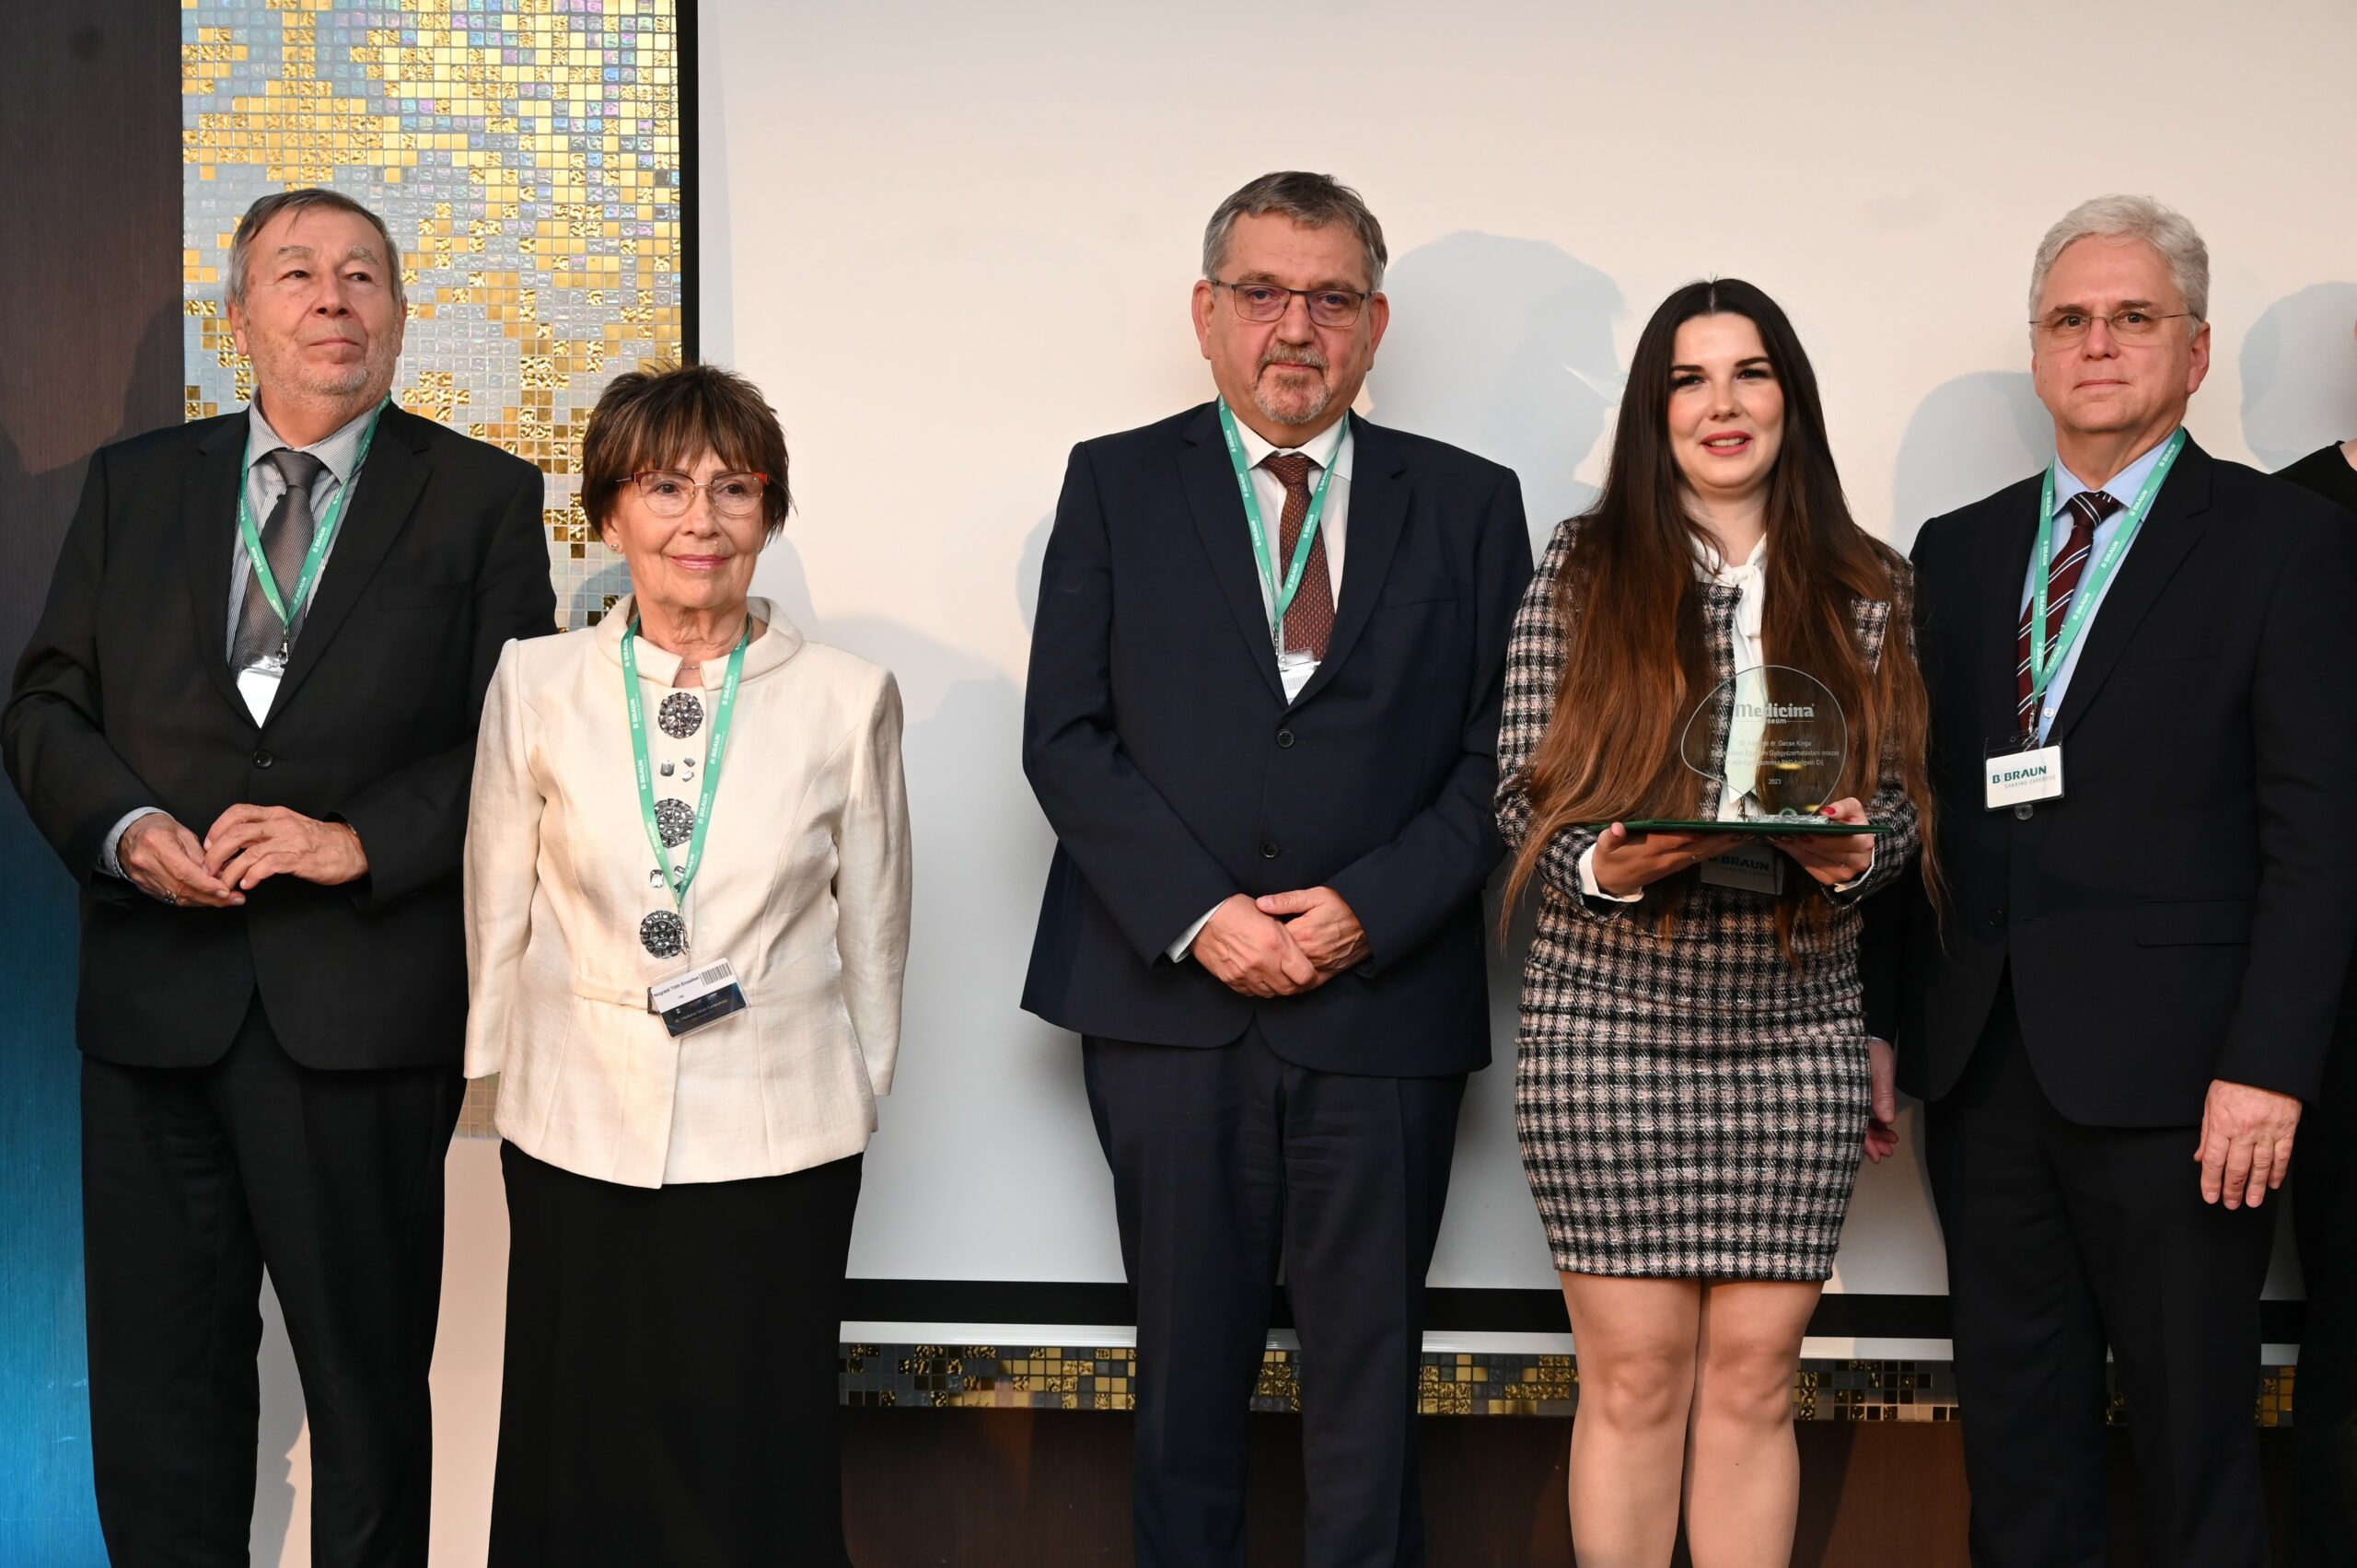 The 46th Medicines Forum Conference and the VII Ministerial – State Secretary Summit were successful – Awards of Excellence were presented